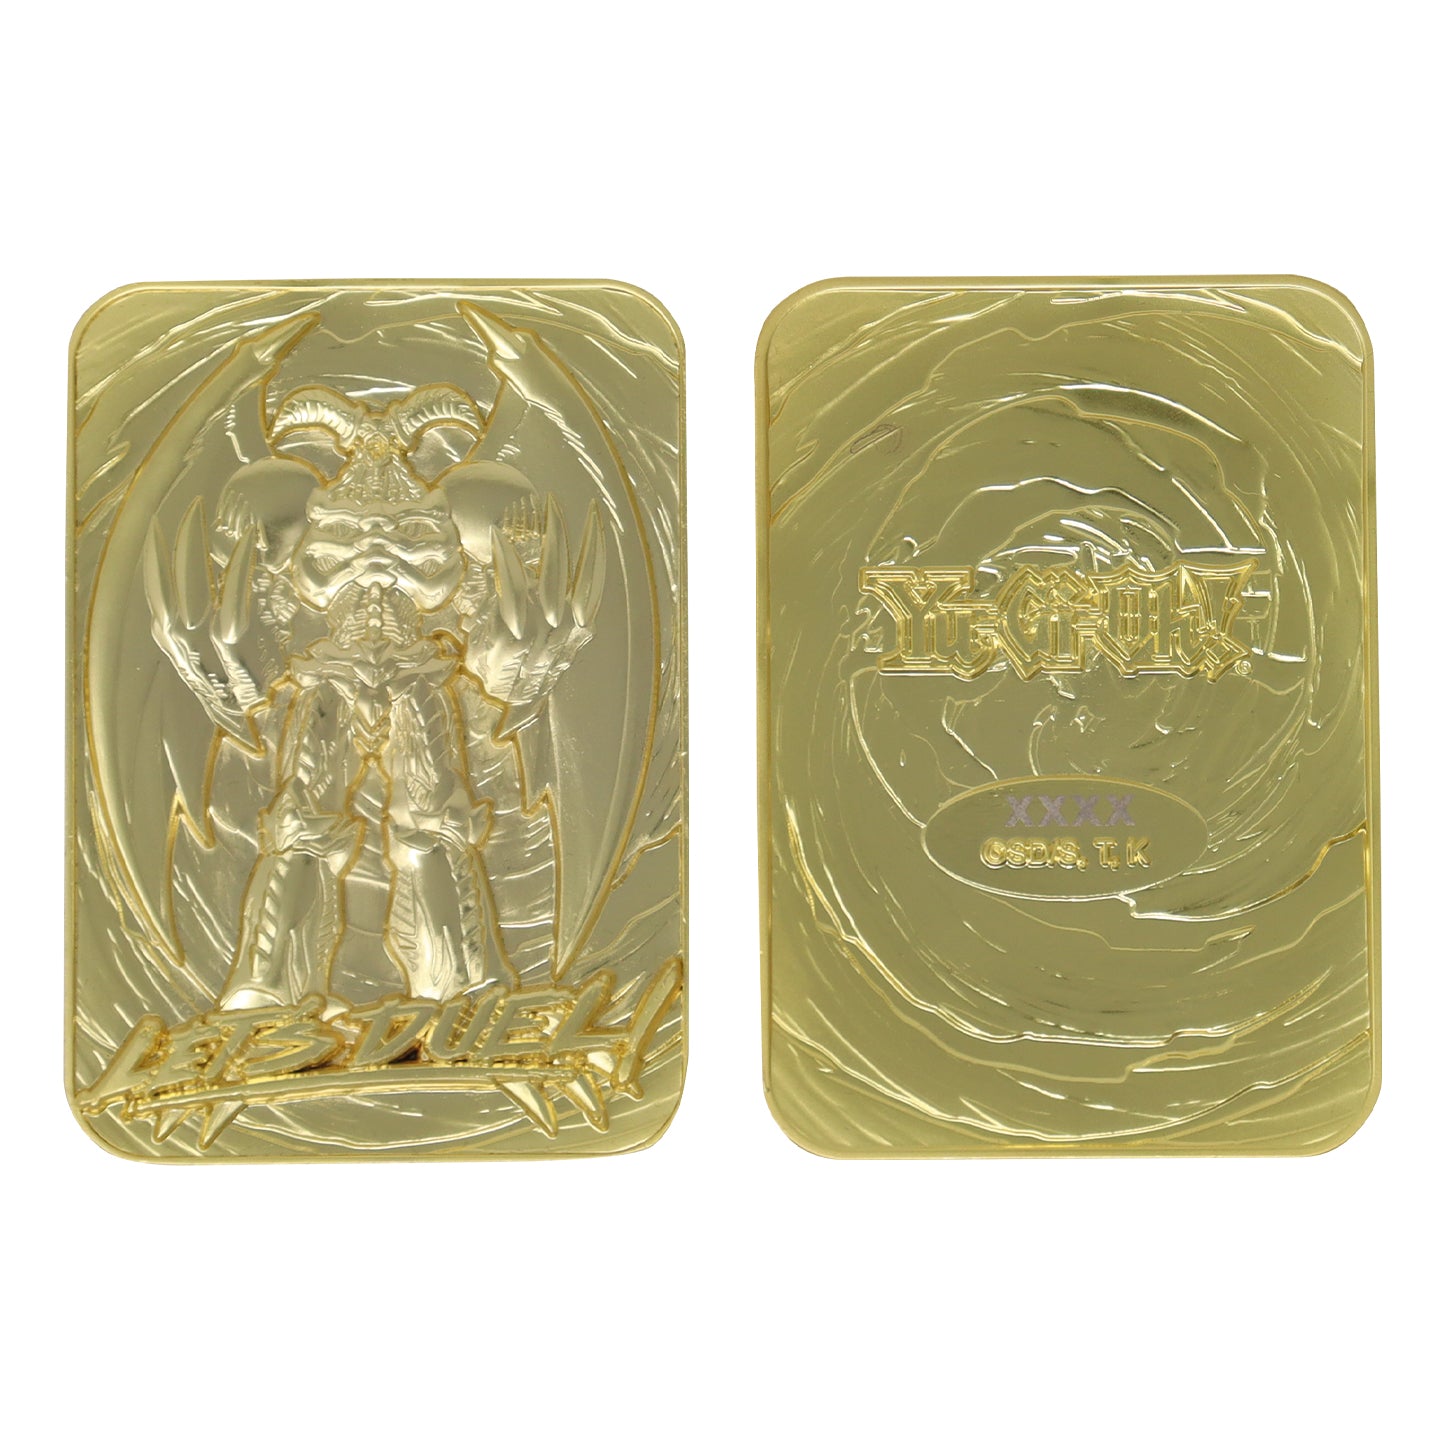 Yu-Gi-Oh! Limited Edition 24k Gold Plated Summoned Skull Metal Card